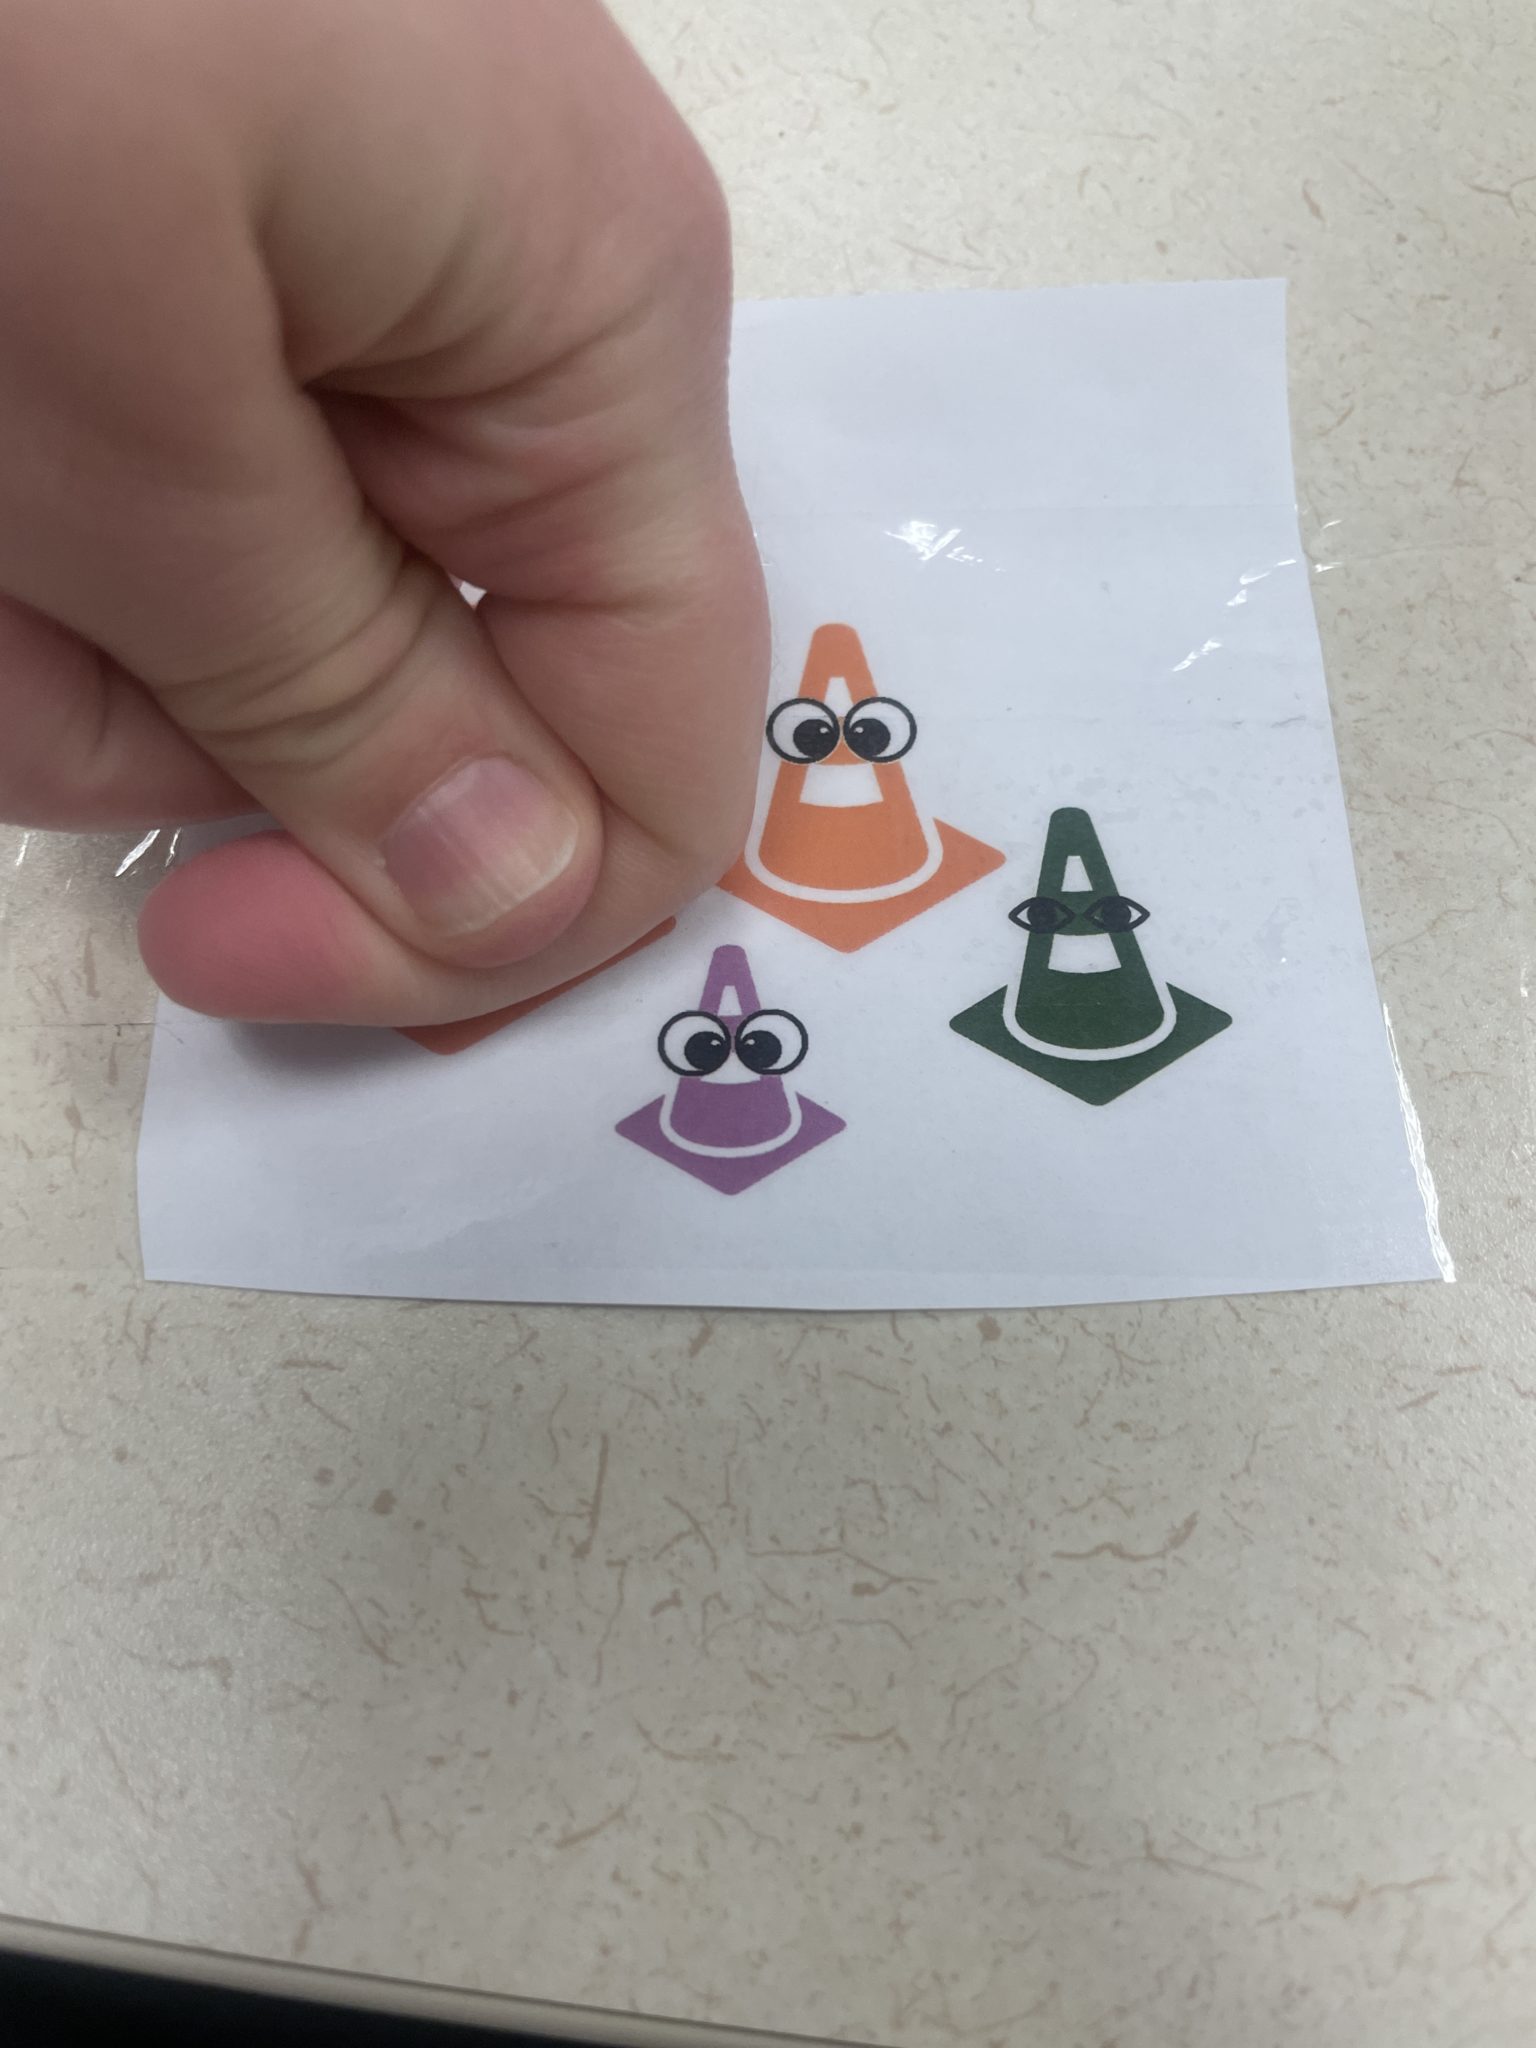 Image of a white hand pressing down on the first two knuckles of its pointer finger to burnish or rub packing tape across the top of a toner-printed image of four traffic cones with googly eyes (2 orange cones, 1 purple cone and 1 green cone).